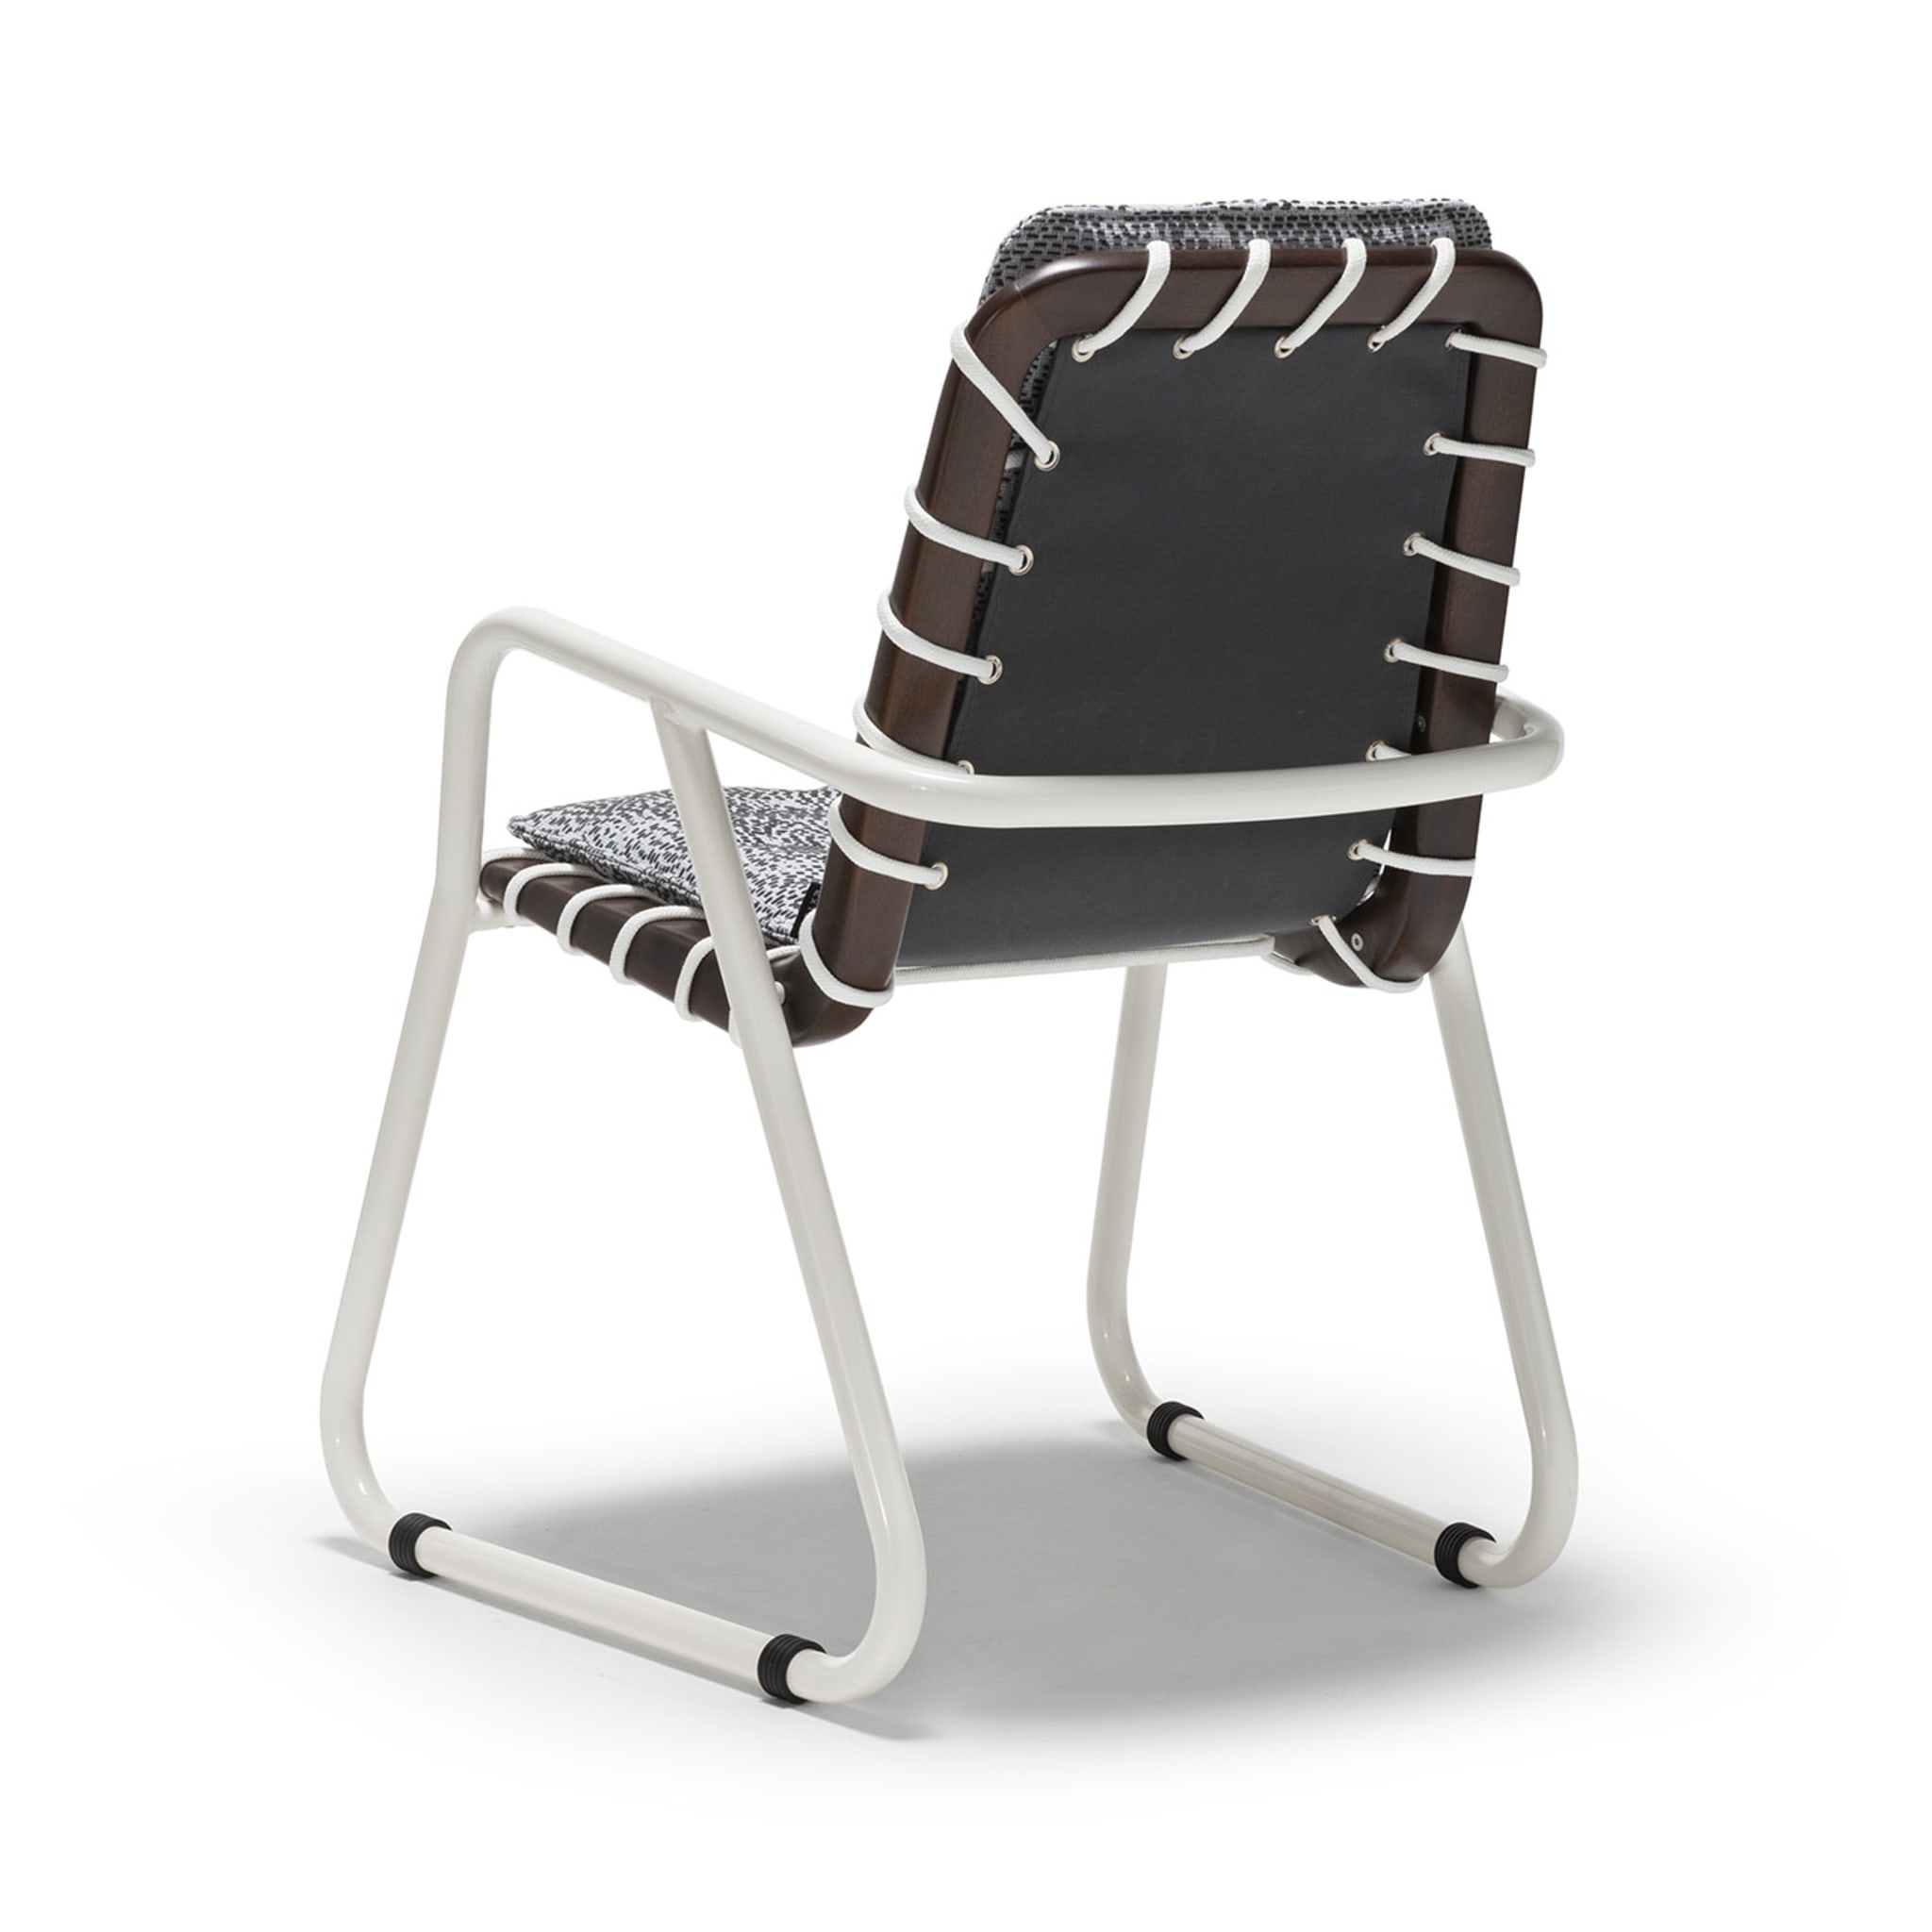 Sunset Black-And-White Dining Armchair by Paola Navone - Alternative view 3